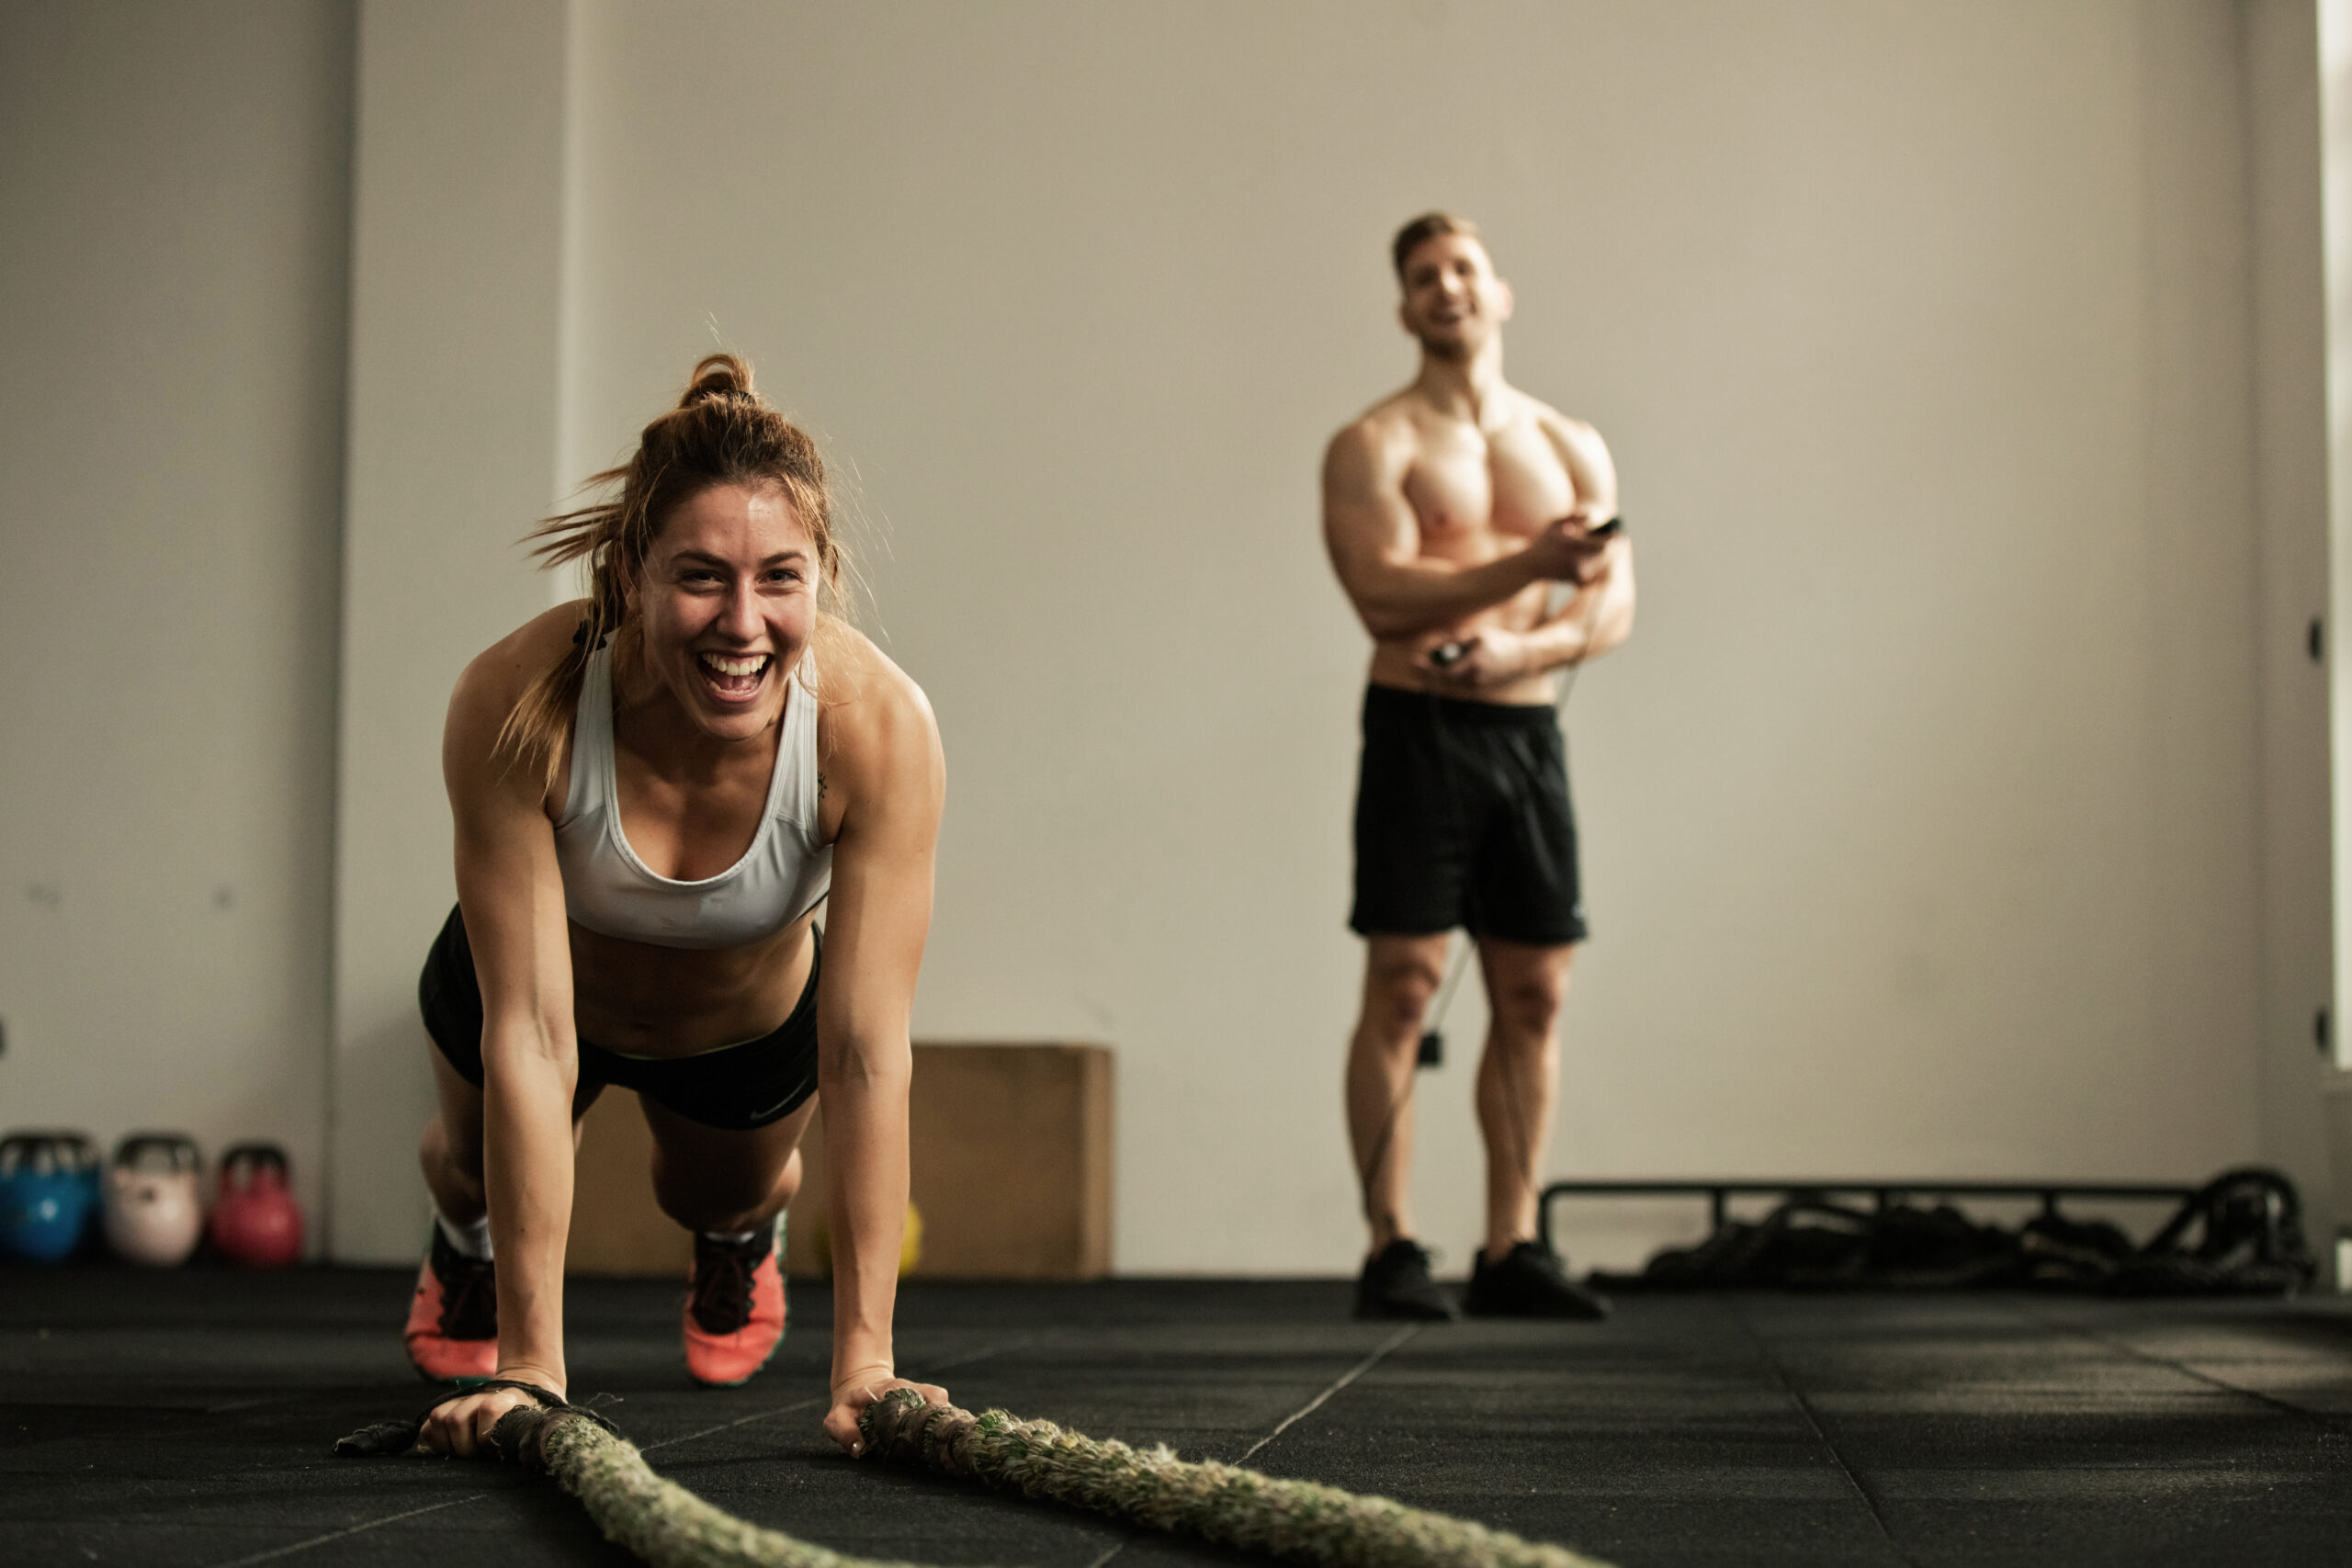 cheerful female athlete doing pushups while exercising with battle rope and having fun in a gym there is a man in the background scaled